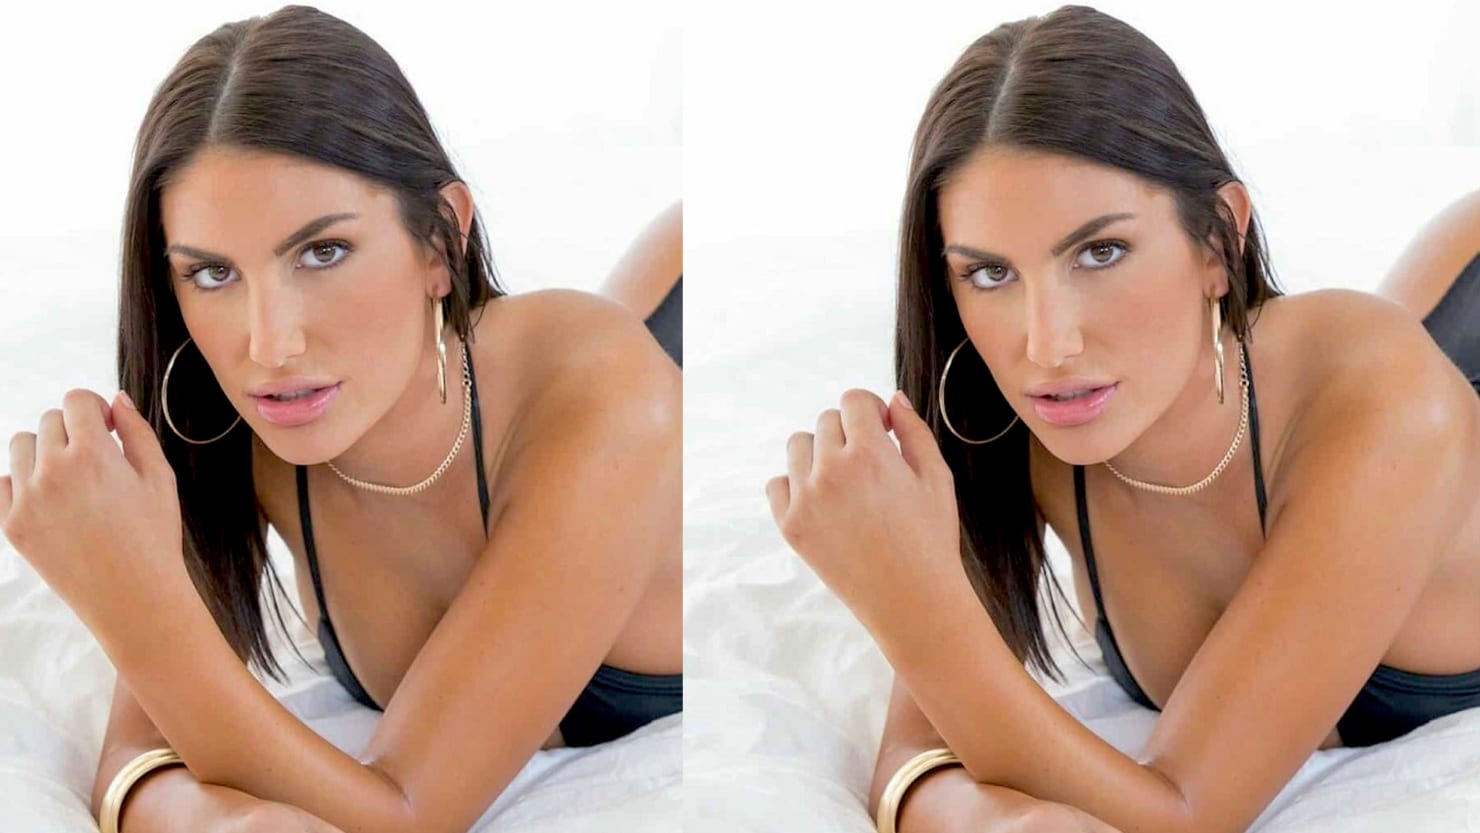 Gay Forced Swallow Porn - Mother of 'Cyberbullied' Porn Star August Ames Opens Up About Her Last Days